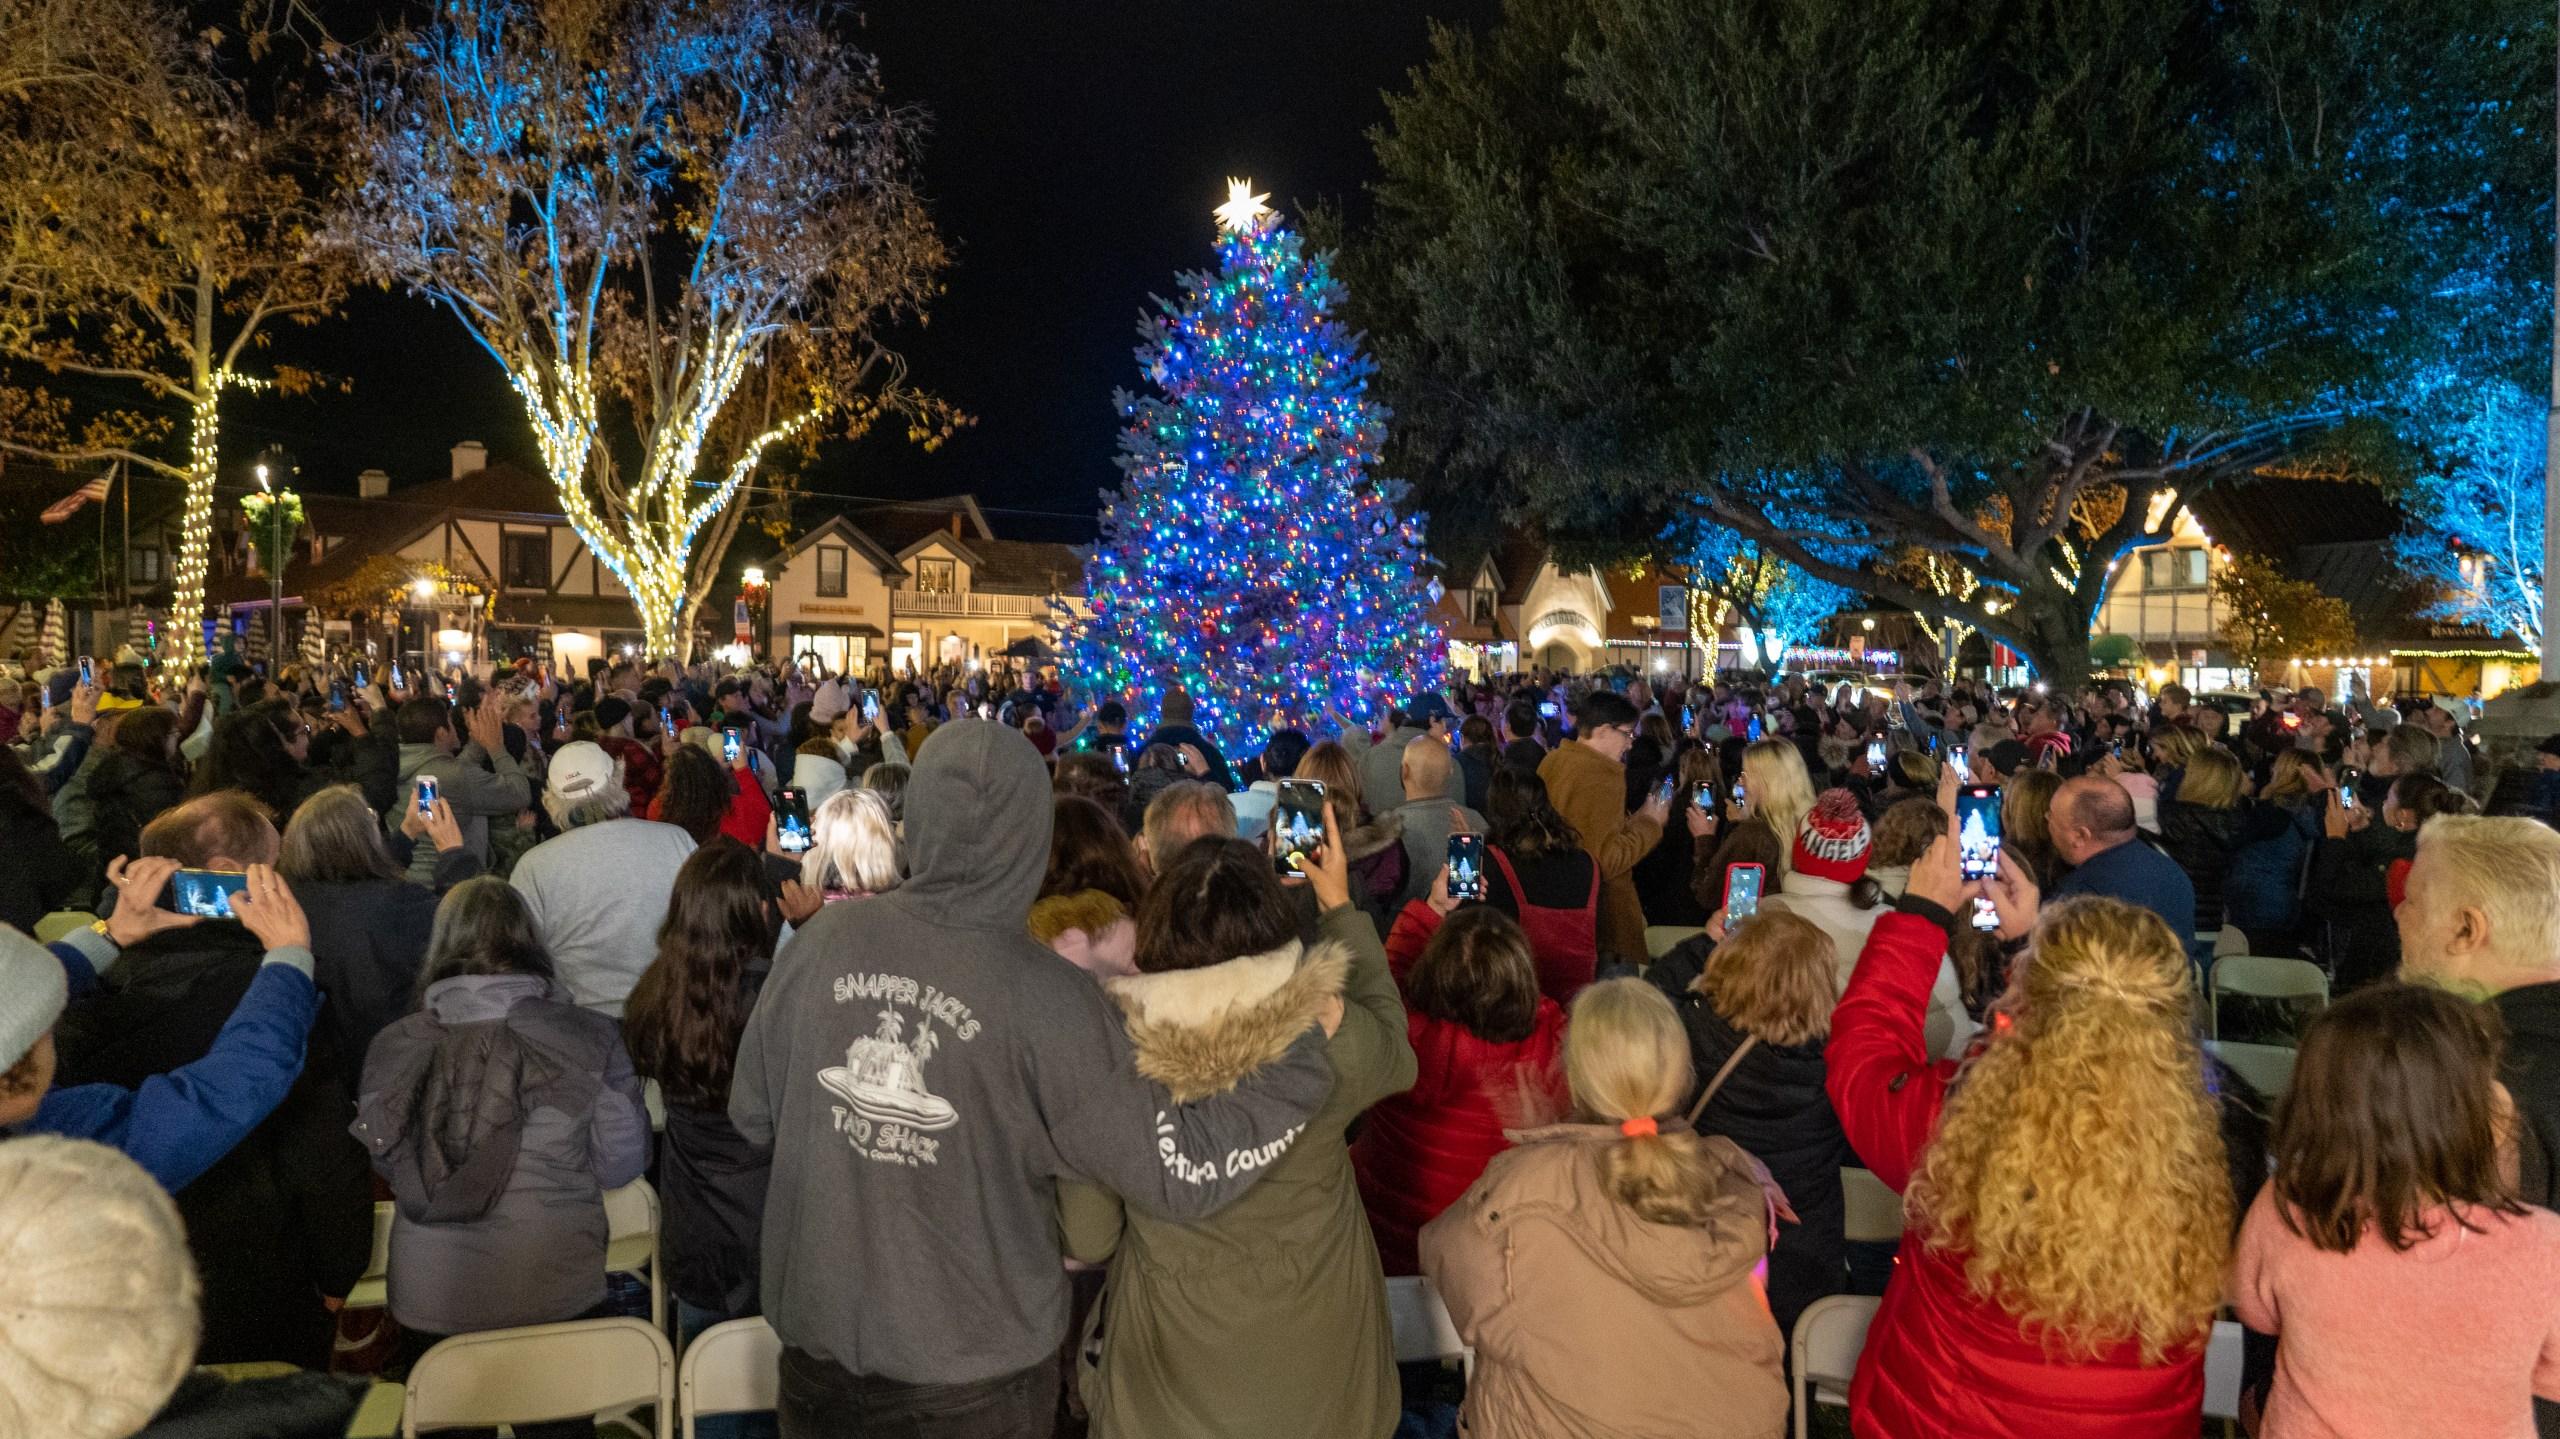 California S Best Christmas Town Ready To Wele Visitors For